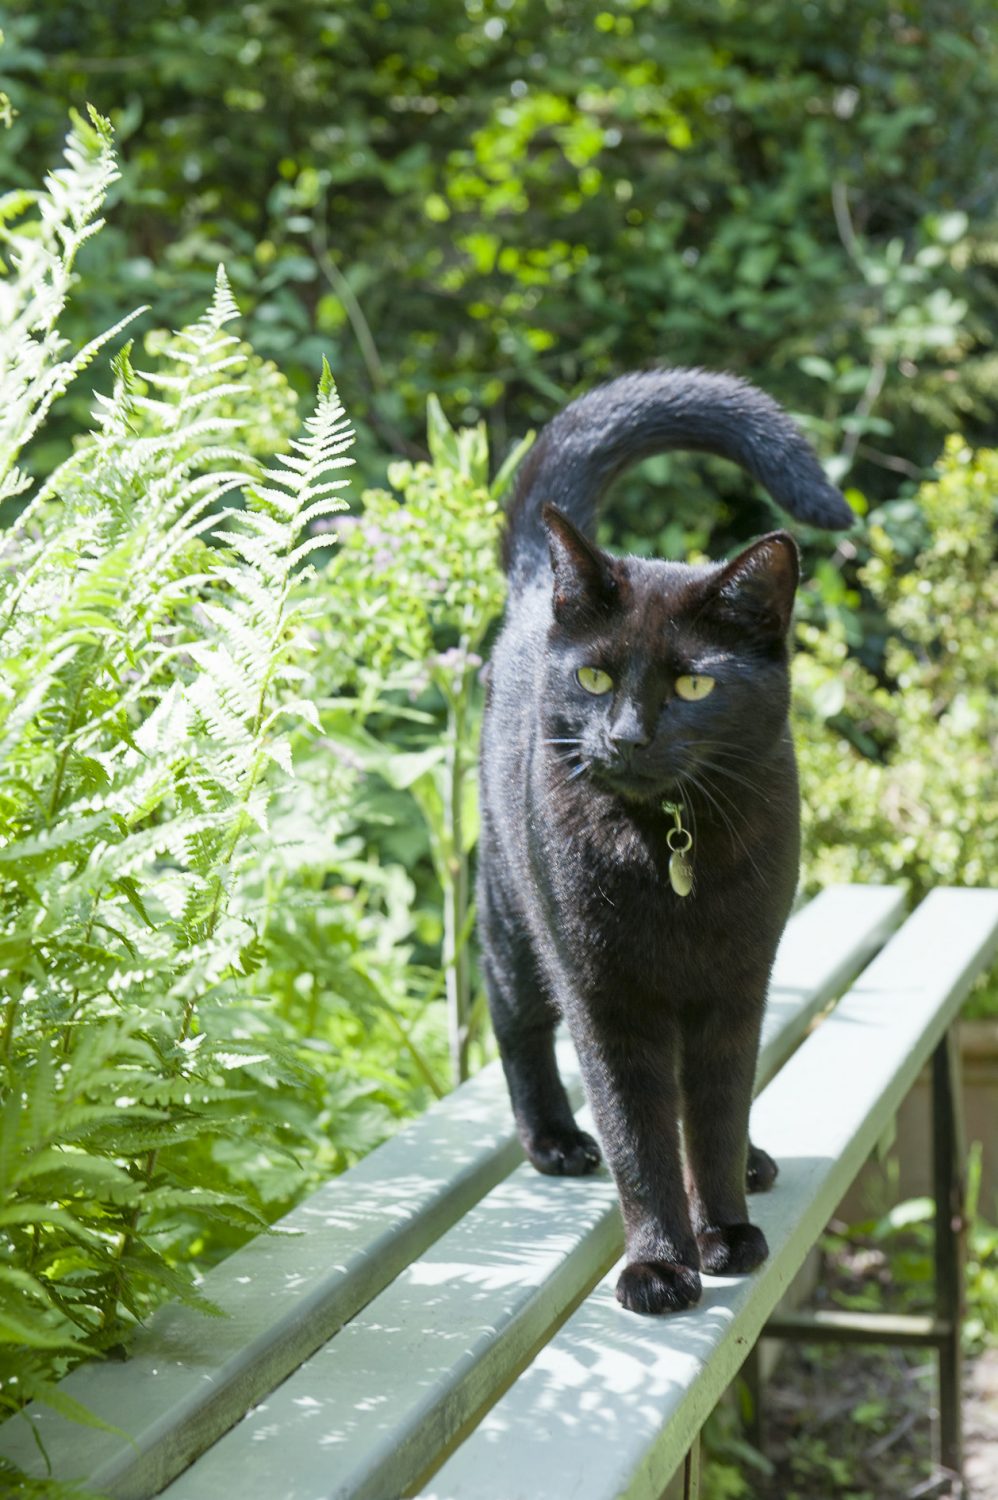 Spider the black cat soaks up some sunshine on a bench